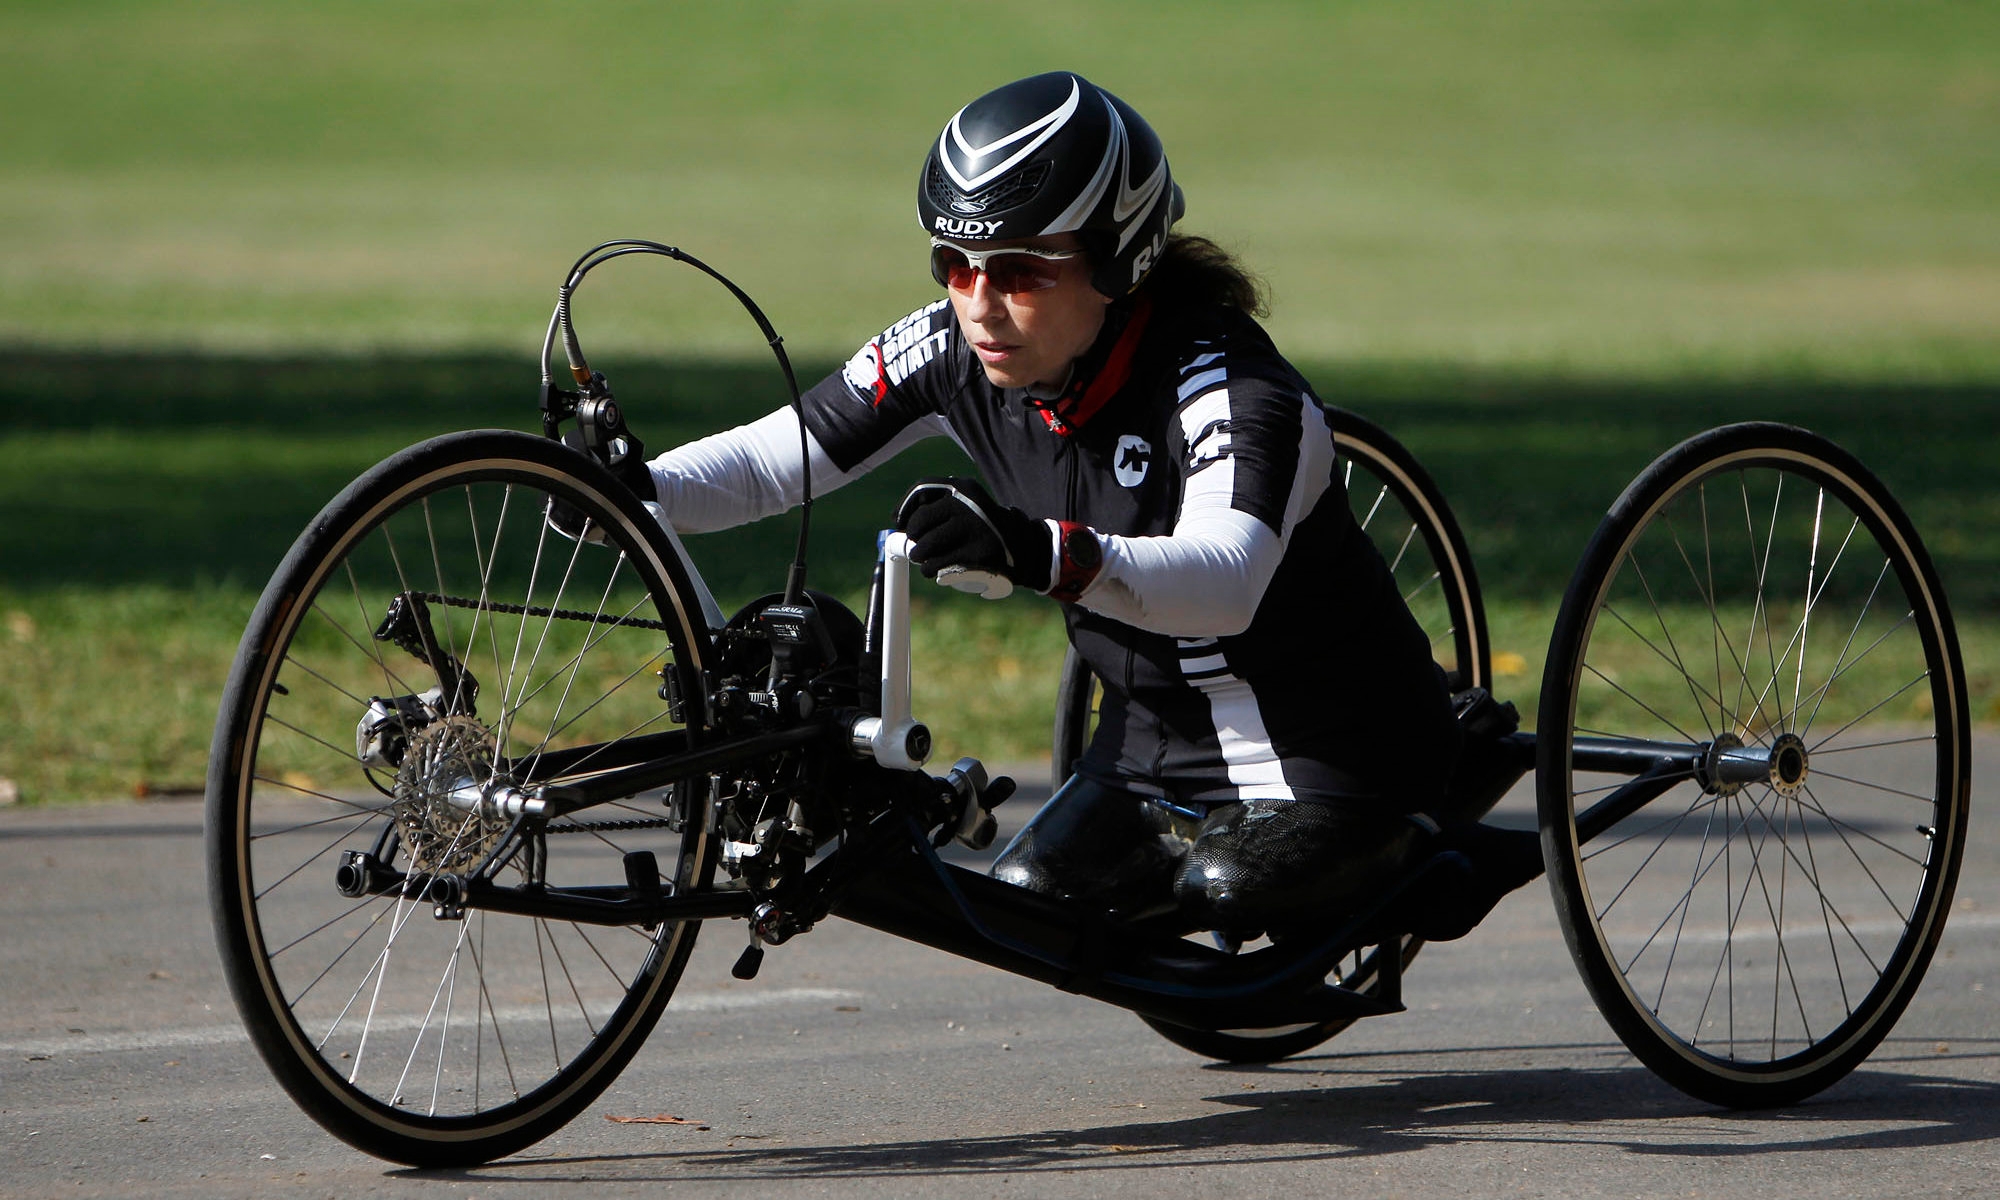 Israeli Paralympic handcyclist Pascale Bercovitch